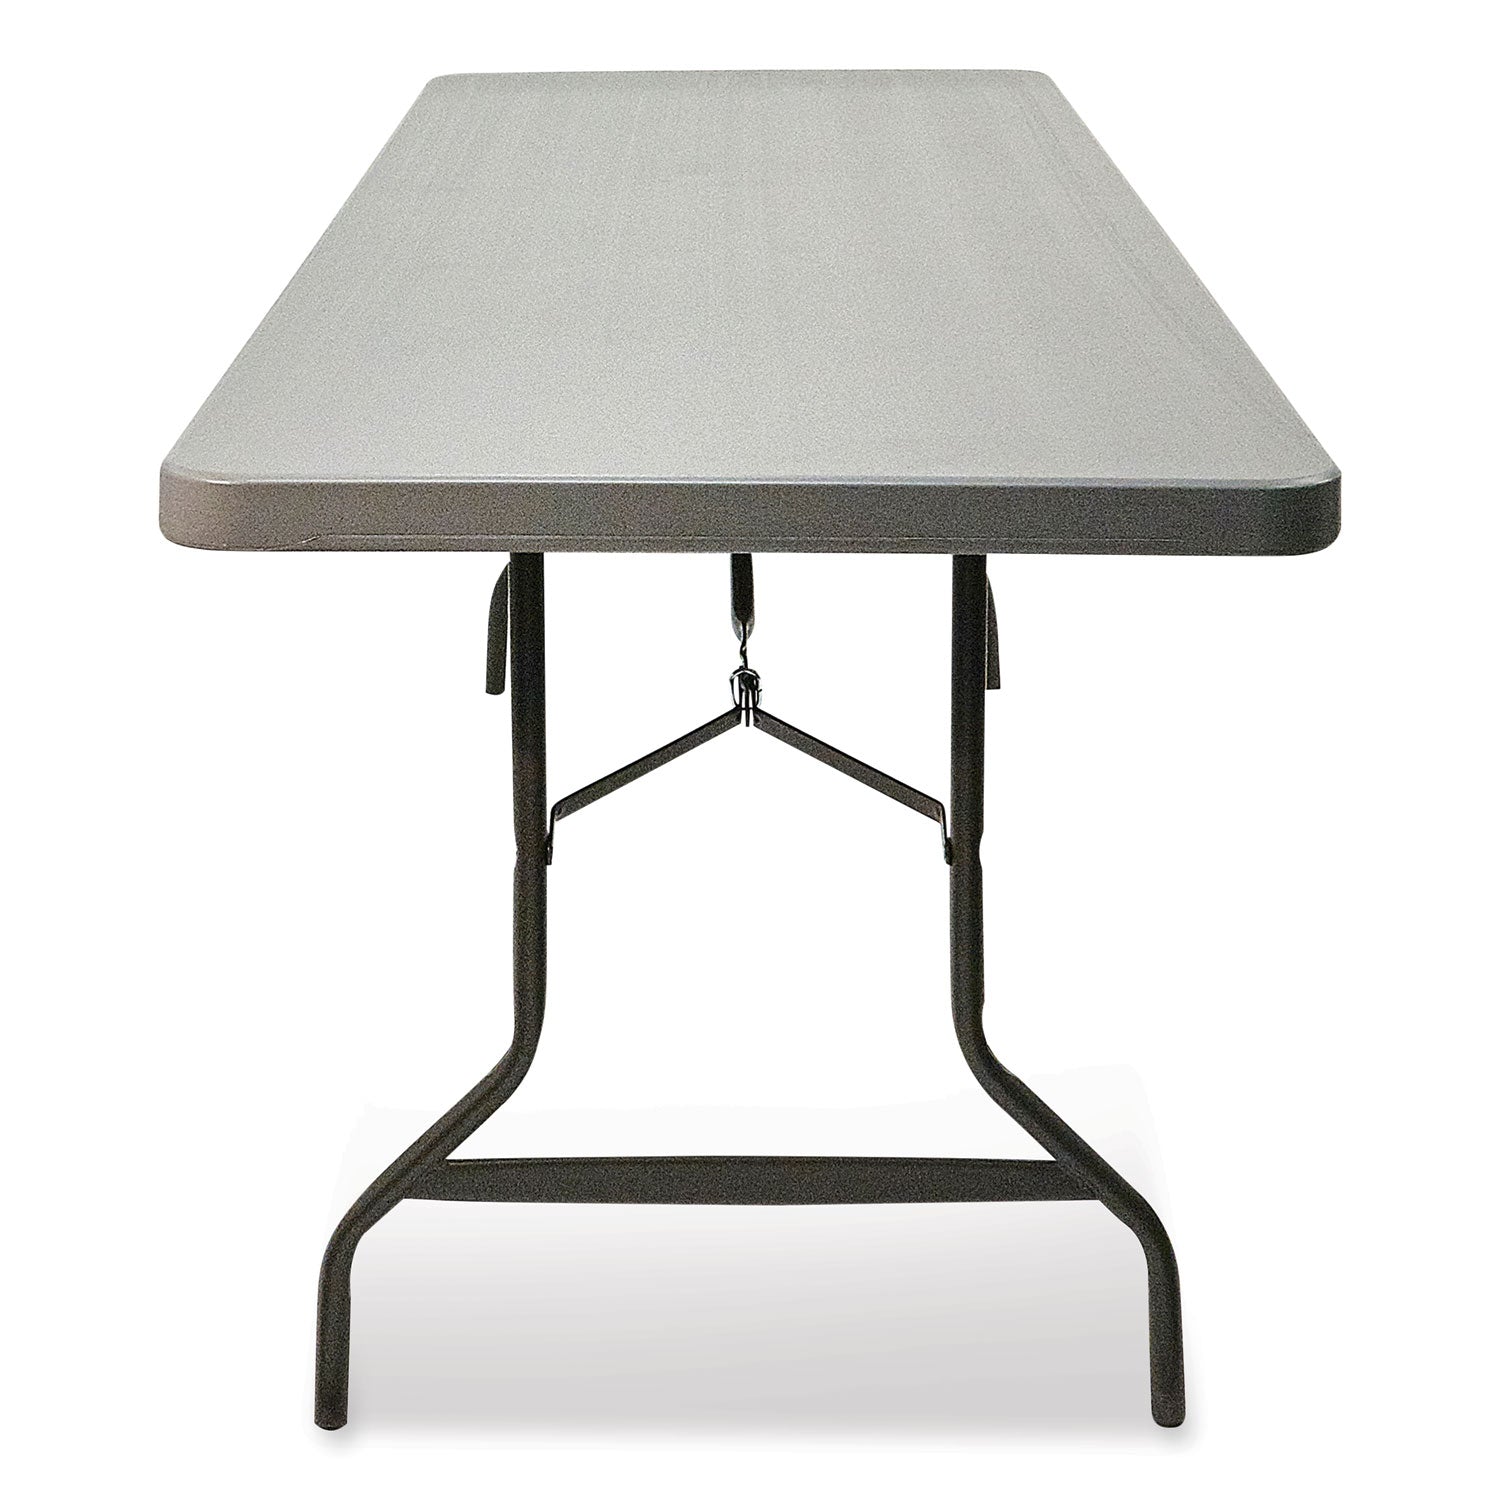 indestructable-commercial-folding-table-rectangular-96-x-30-x-29-charcoal-top-charcoal-base-legs_ice65537 - 3